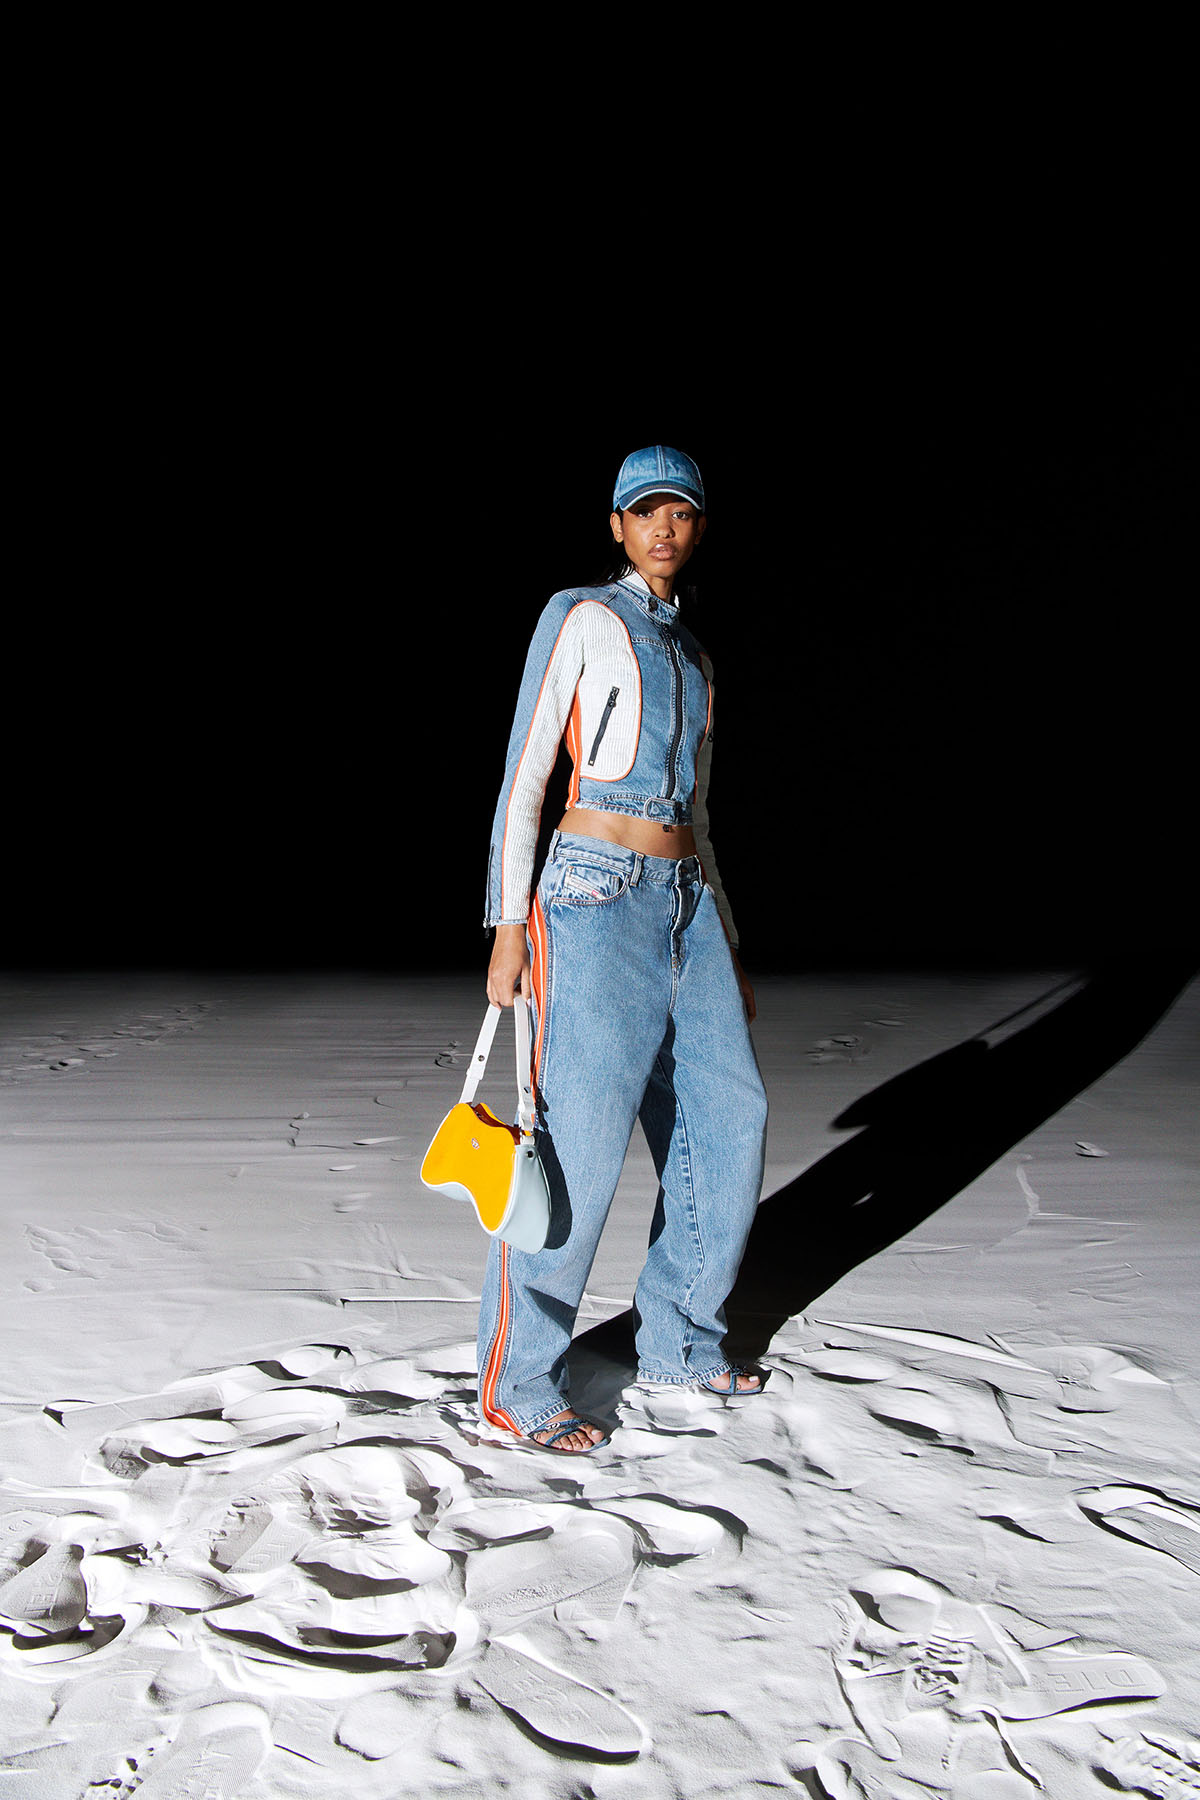 Diesel's Resort 2023 Collection Revives the Skinny Jean